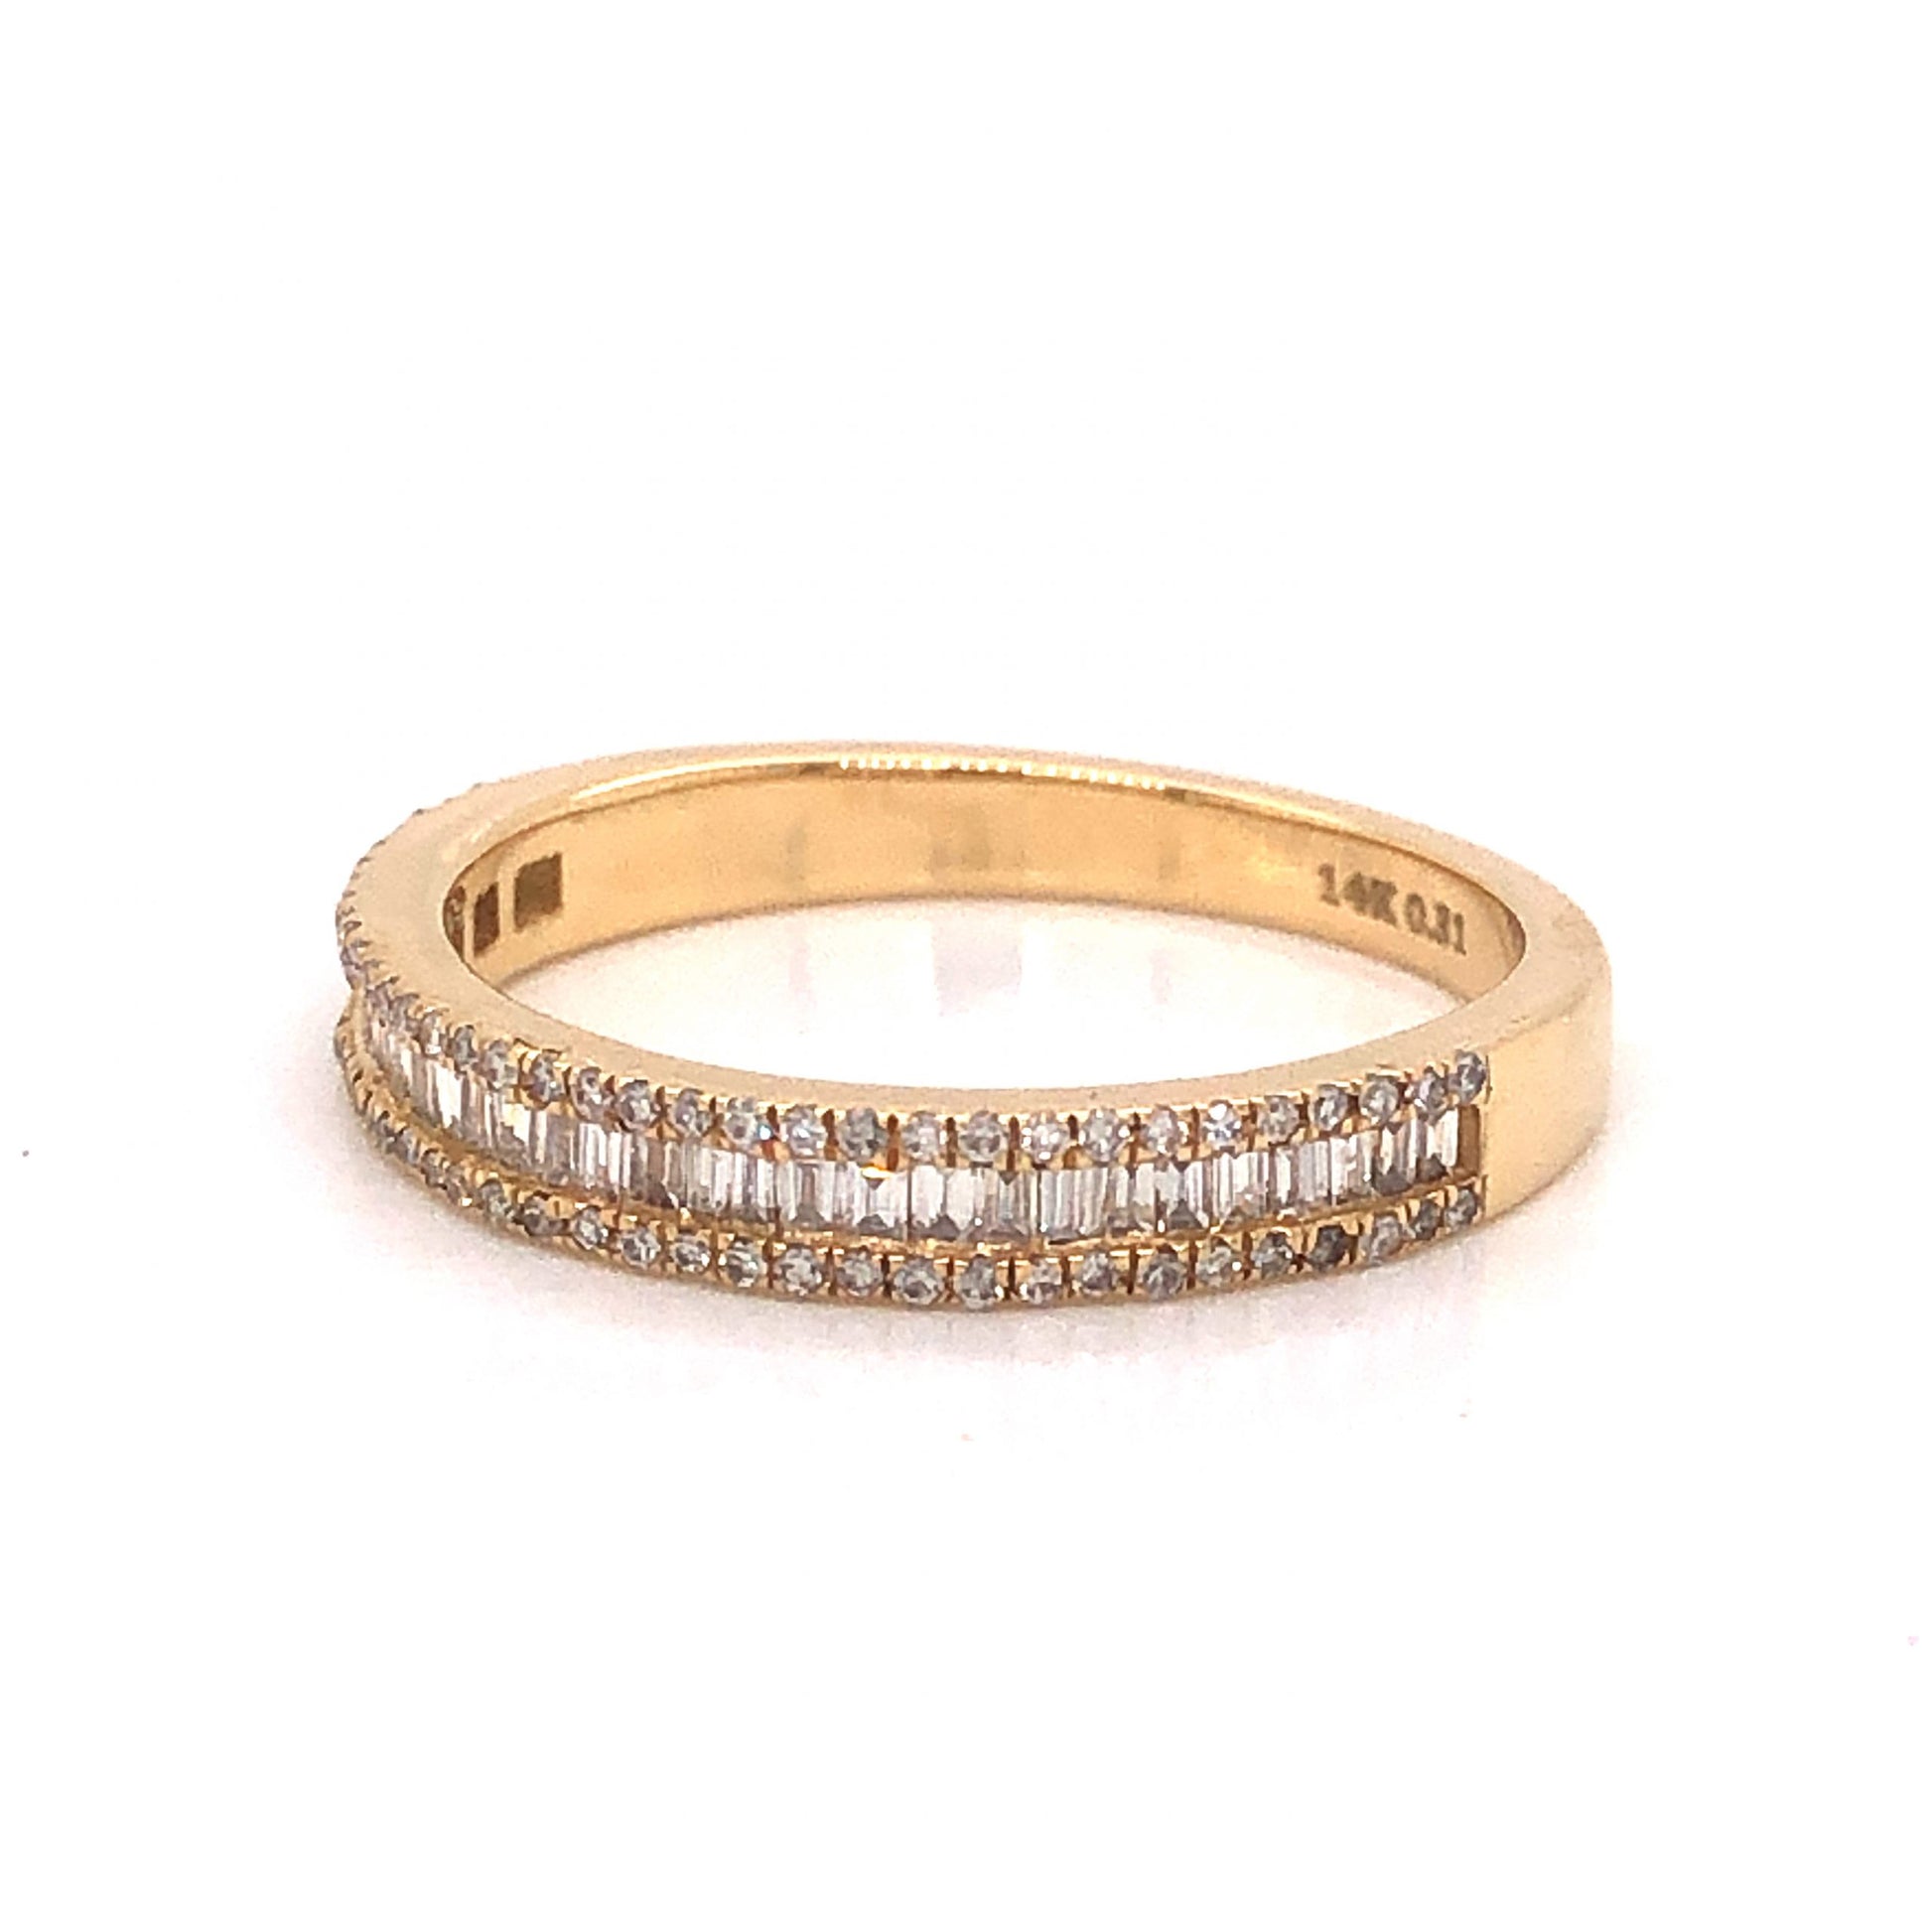 Baguette & Round Pave Diamond Band in 14k Yellow GoldComposition: 14 Karat Yellow GoldRing Size: 6Total Diamond Weight: .31 ctTotal Gram Weight: 2.2 gInscription: 14k 0.31